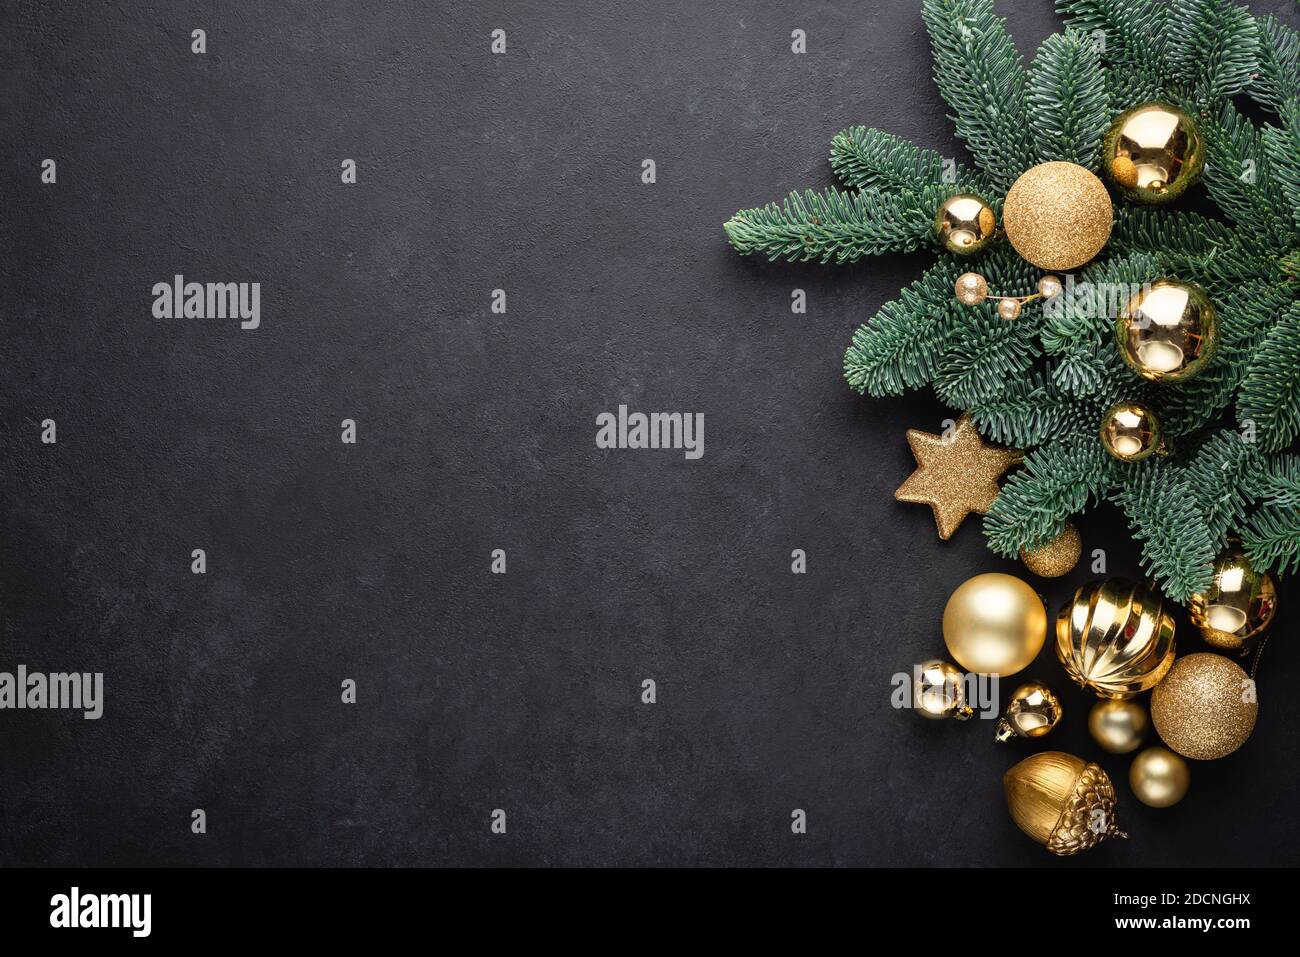 Christmas Background Fir Tree Golden Toys On Black Concrete Background With Copy Space For Text, Design Elements, Greeting Stock Photo